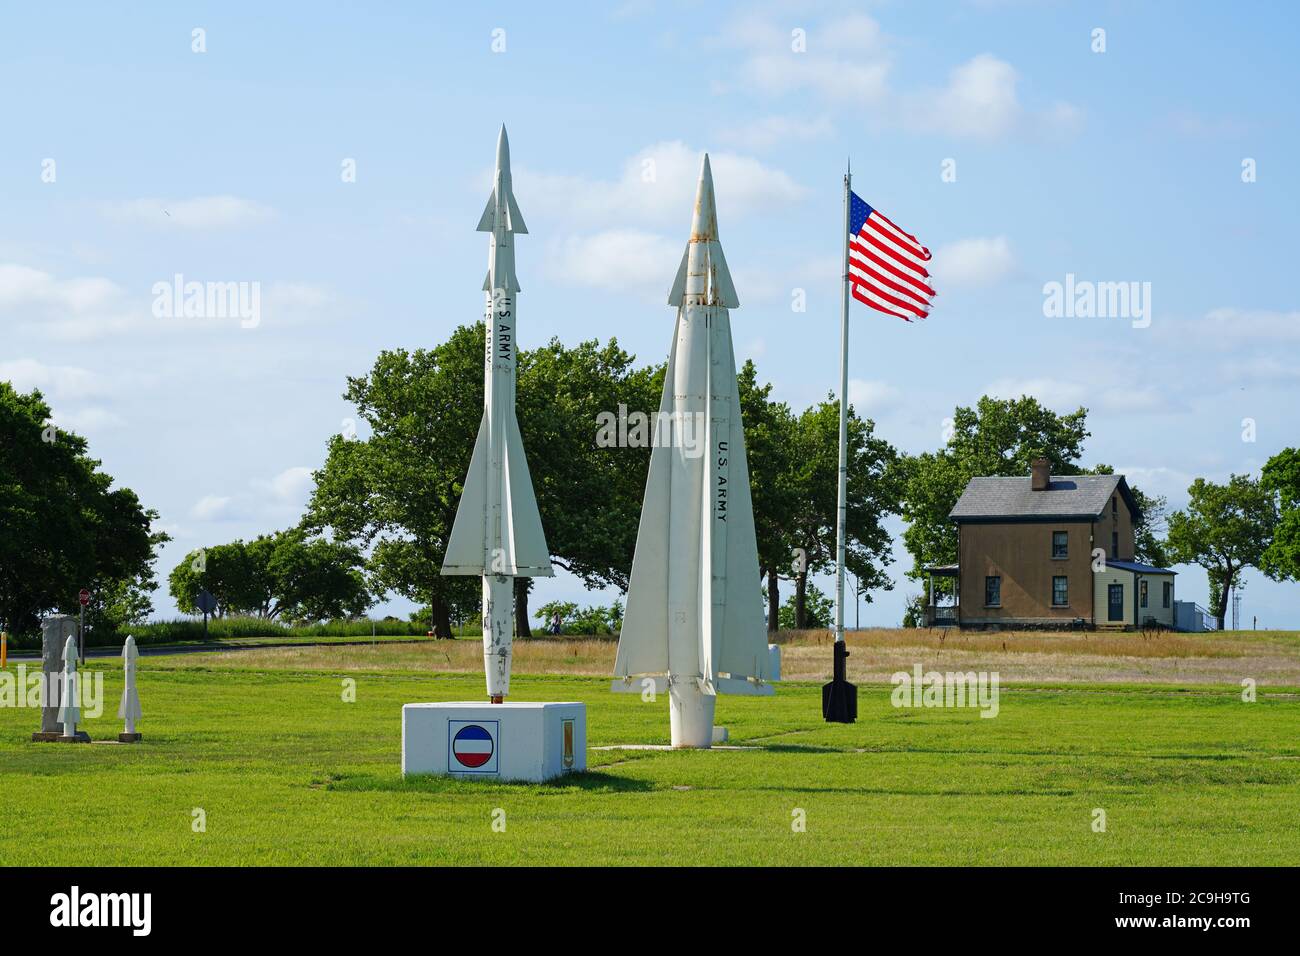 SANDY HOOK, NK –16 JUL 2020- View of Nike missiles located on the grounds of Fort Hancock, Gateway National Recreation Area in New Jersey, United Stat Stock Photo